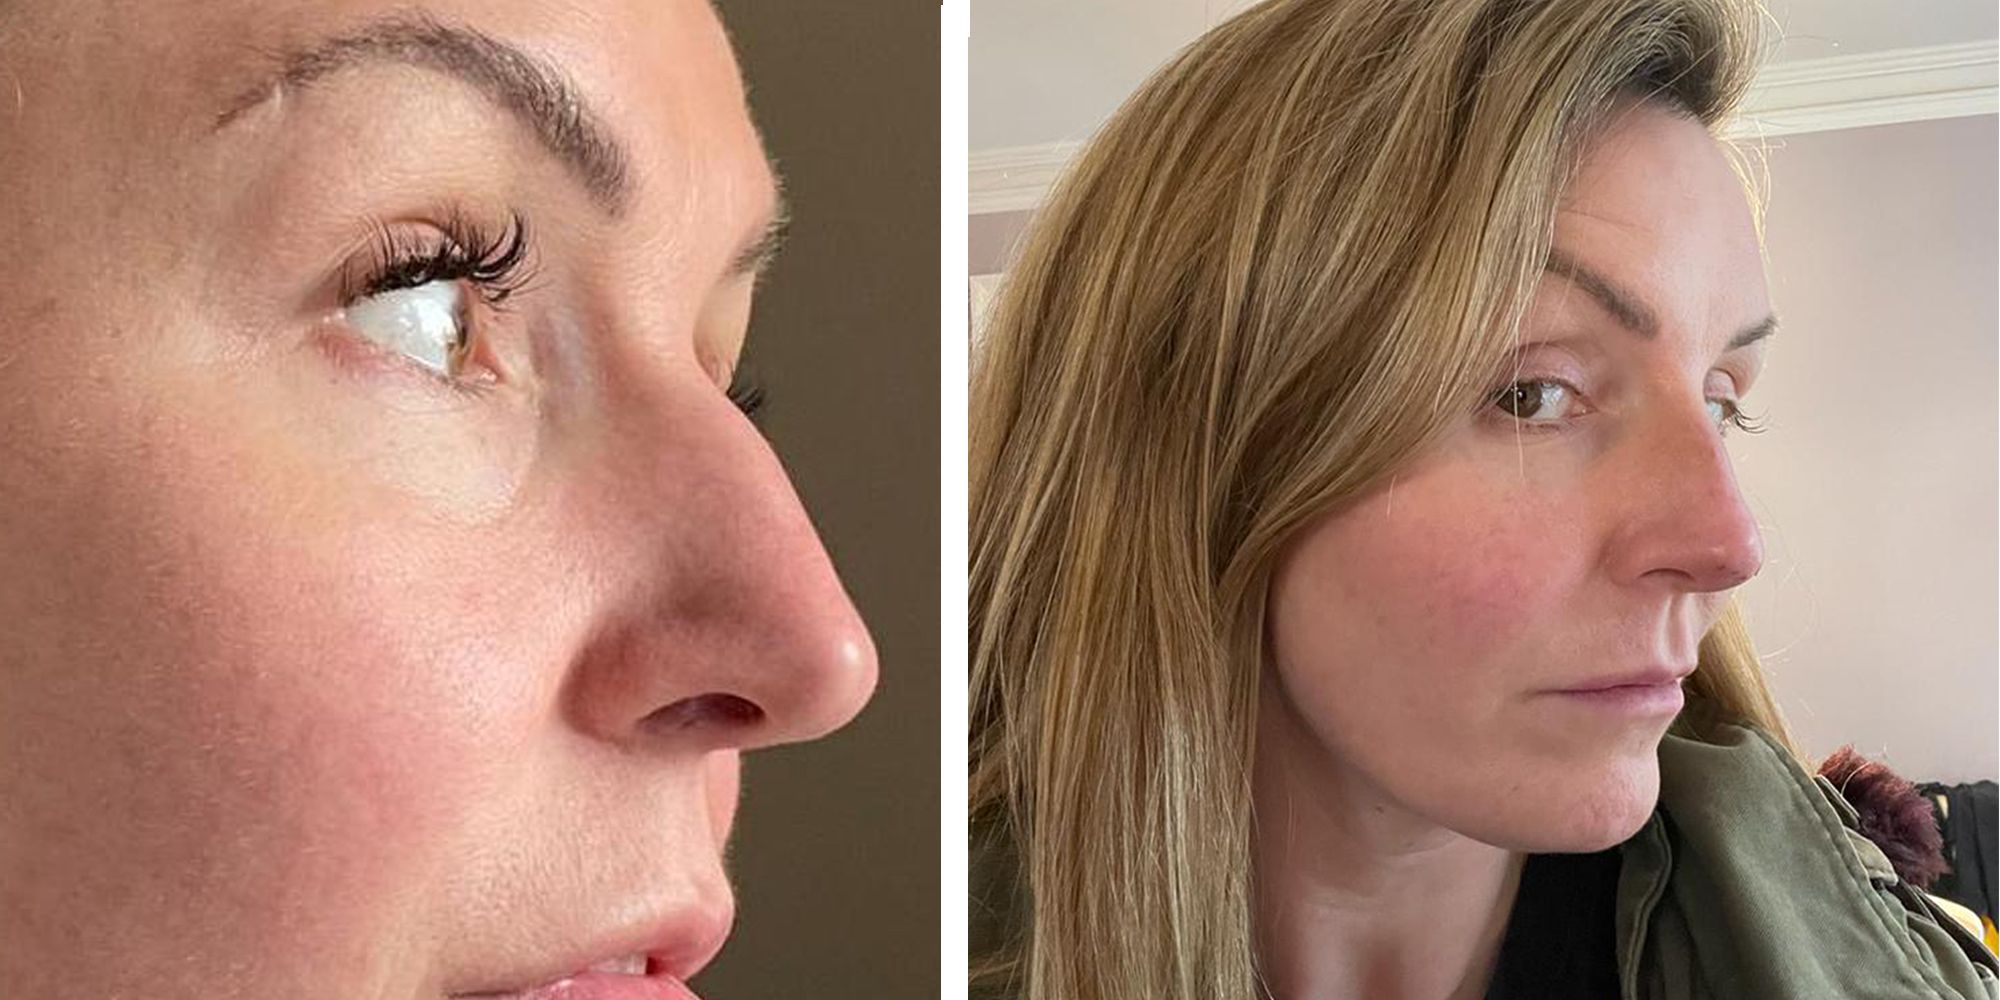 How to Make Your Nose Smaller Without Surgery?